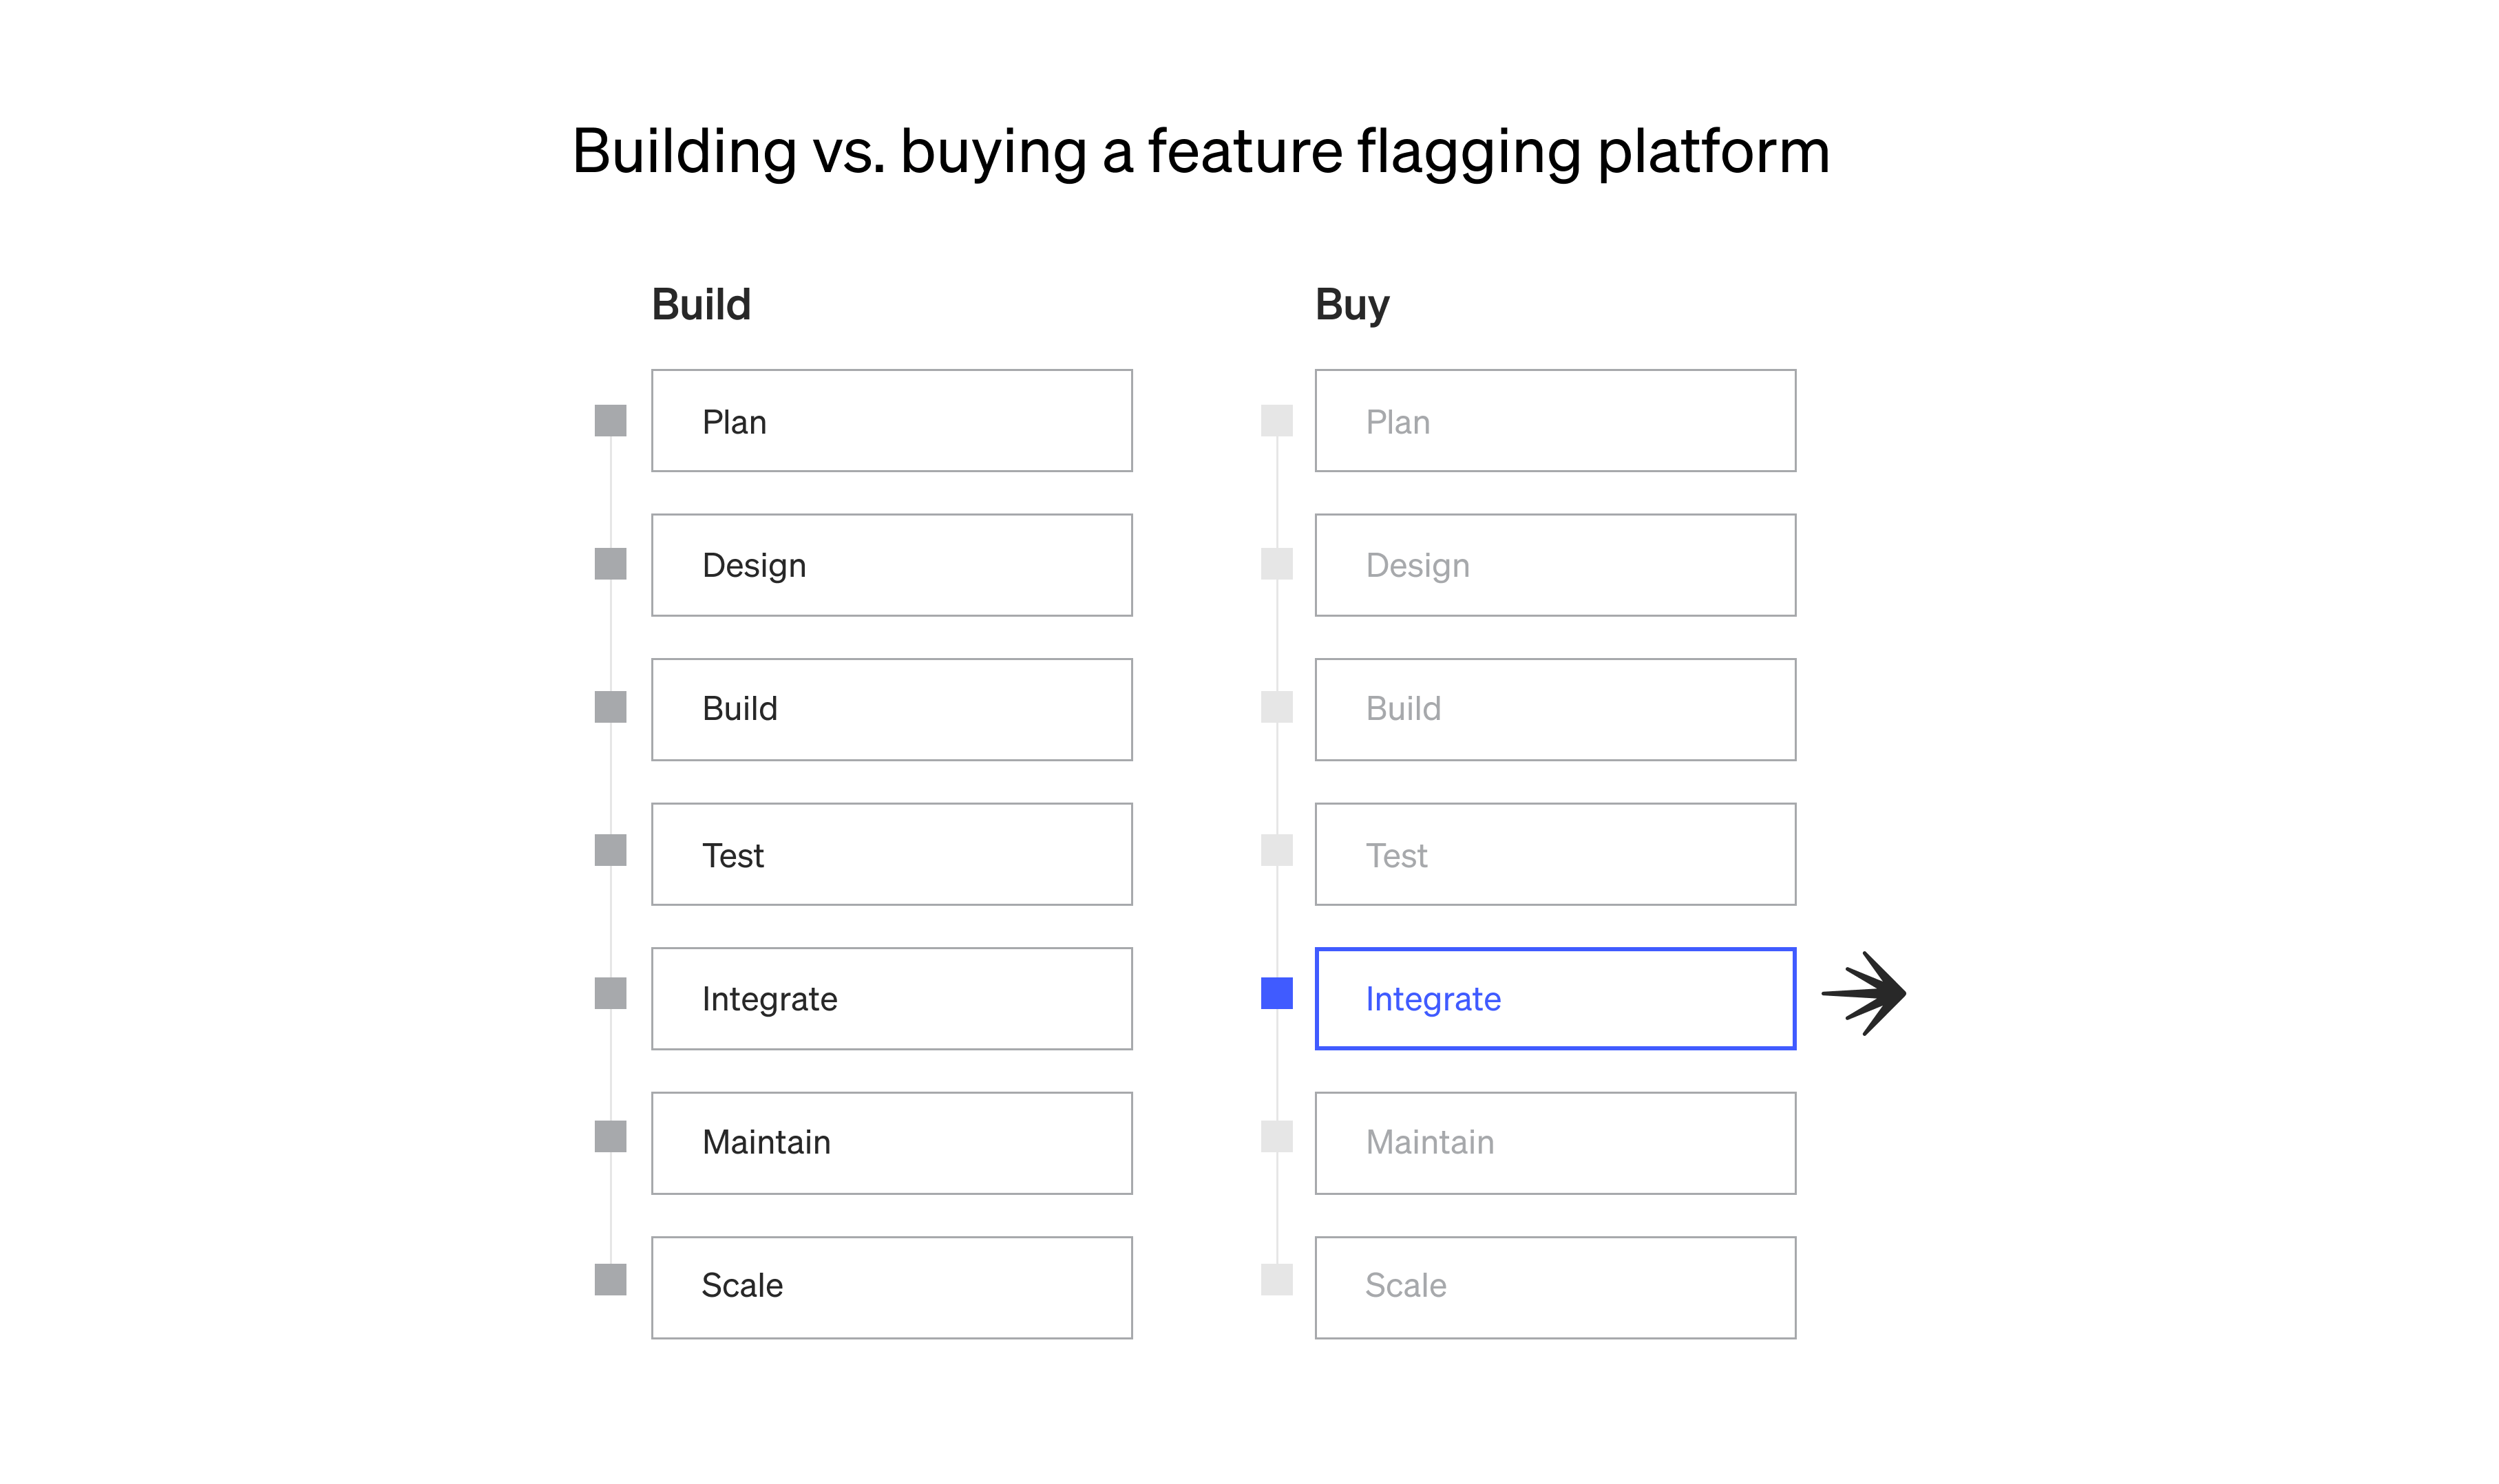 Building vs buying a feature flagging platform